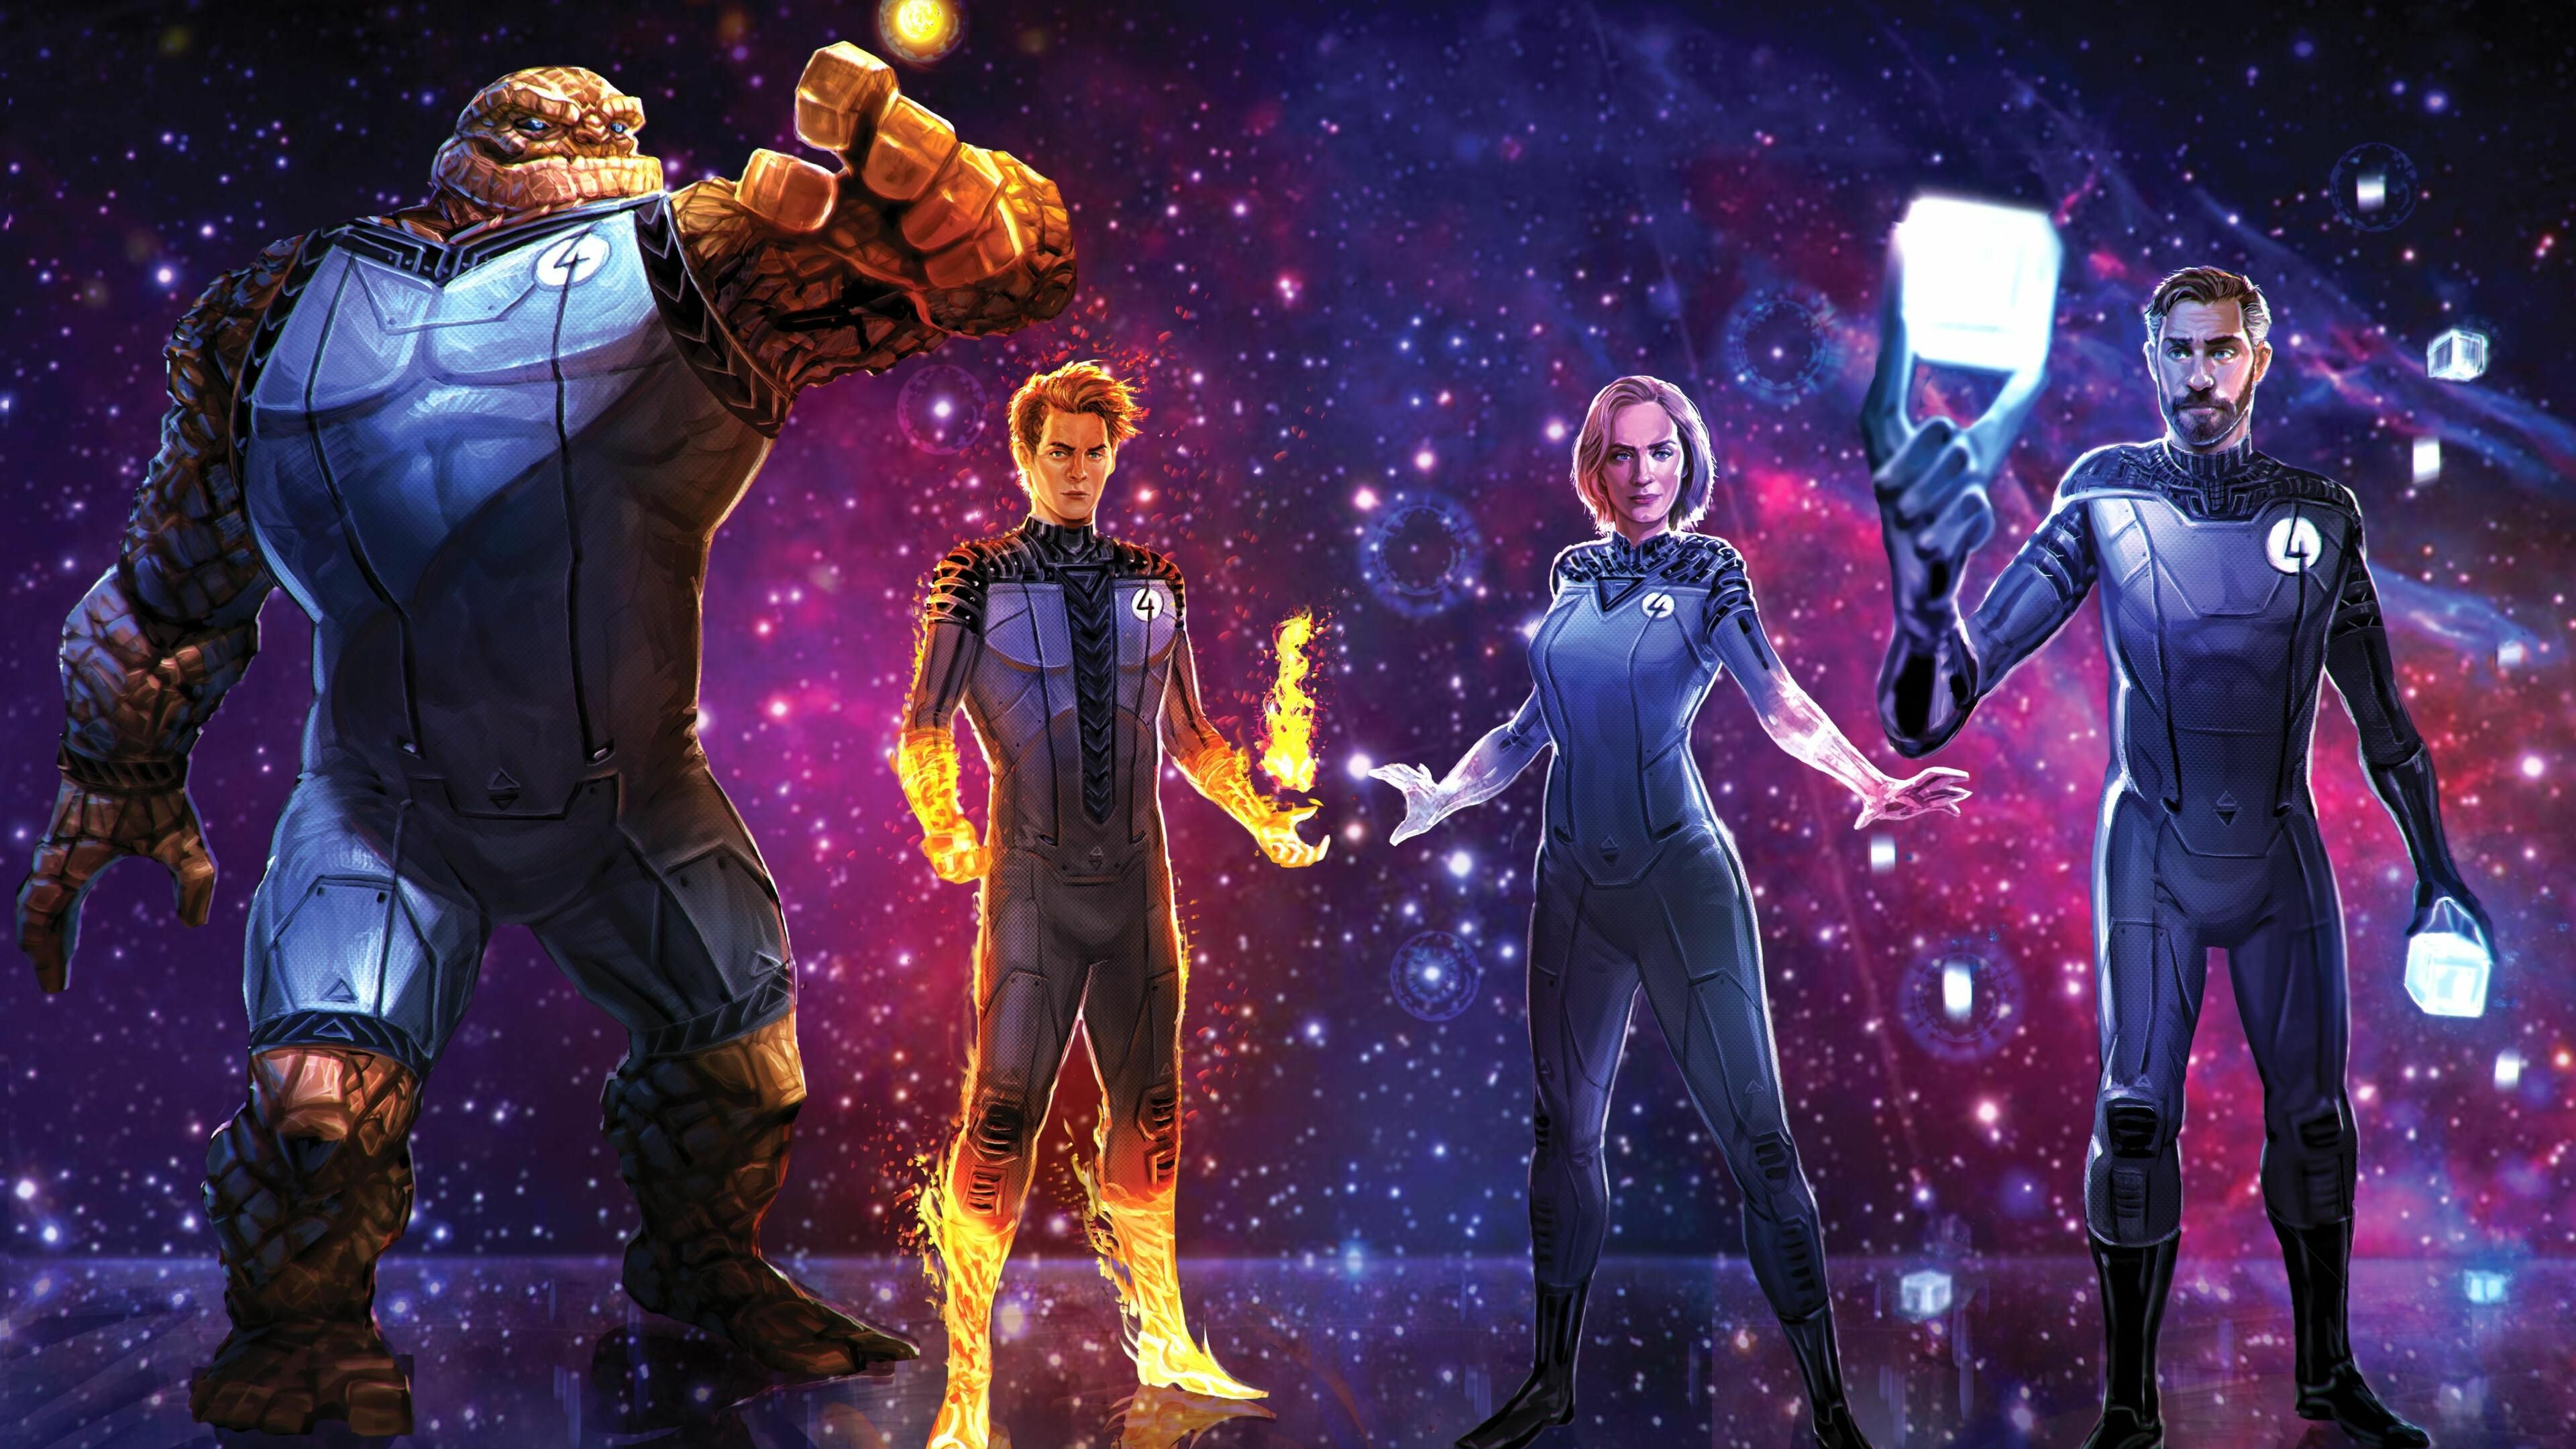 Fantastic 4: The Thing, the Human Torch, the Invisible Woman and Mister Fantastic, The first four heroes of the Marvel Age of Comics. 3840x2160 4K Wallpaper.